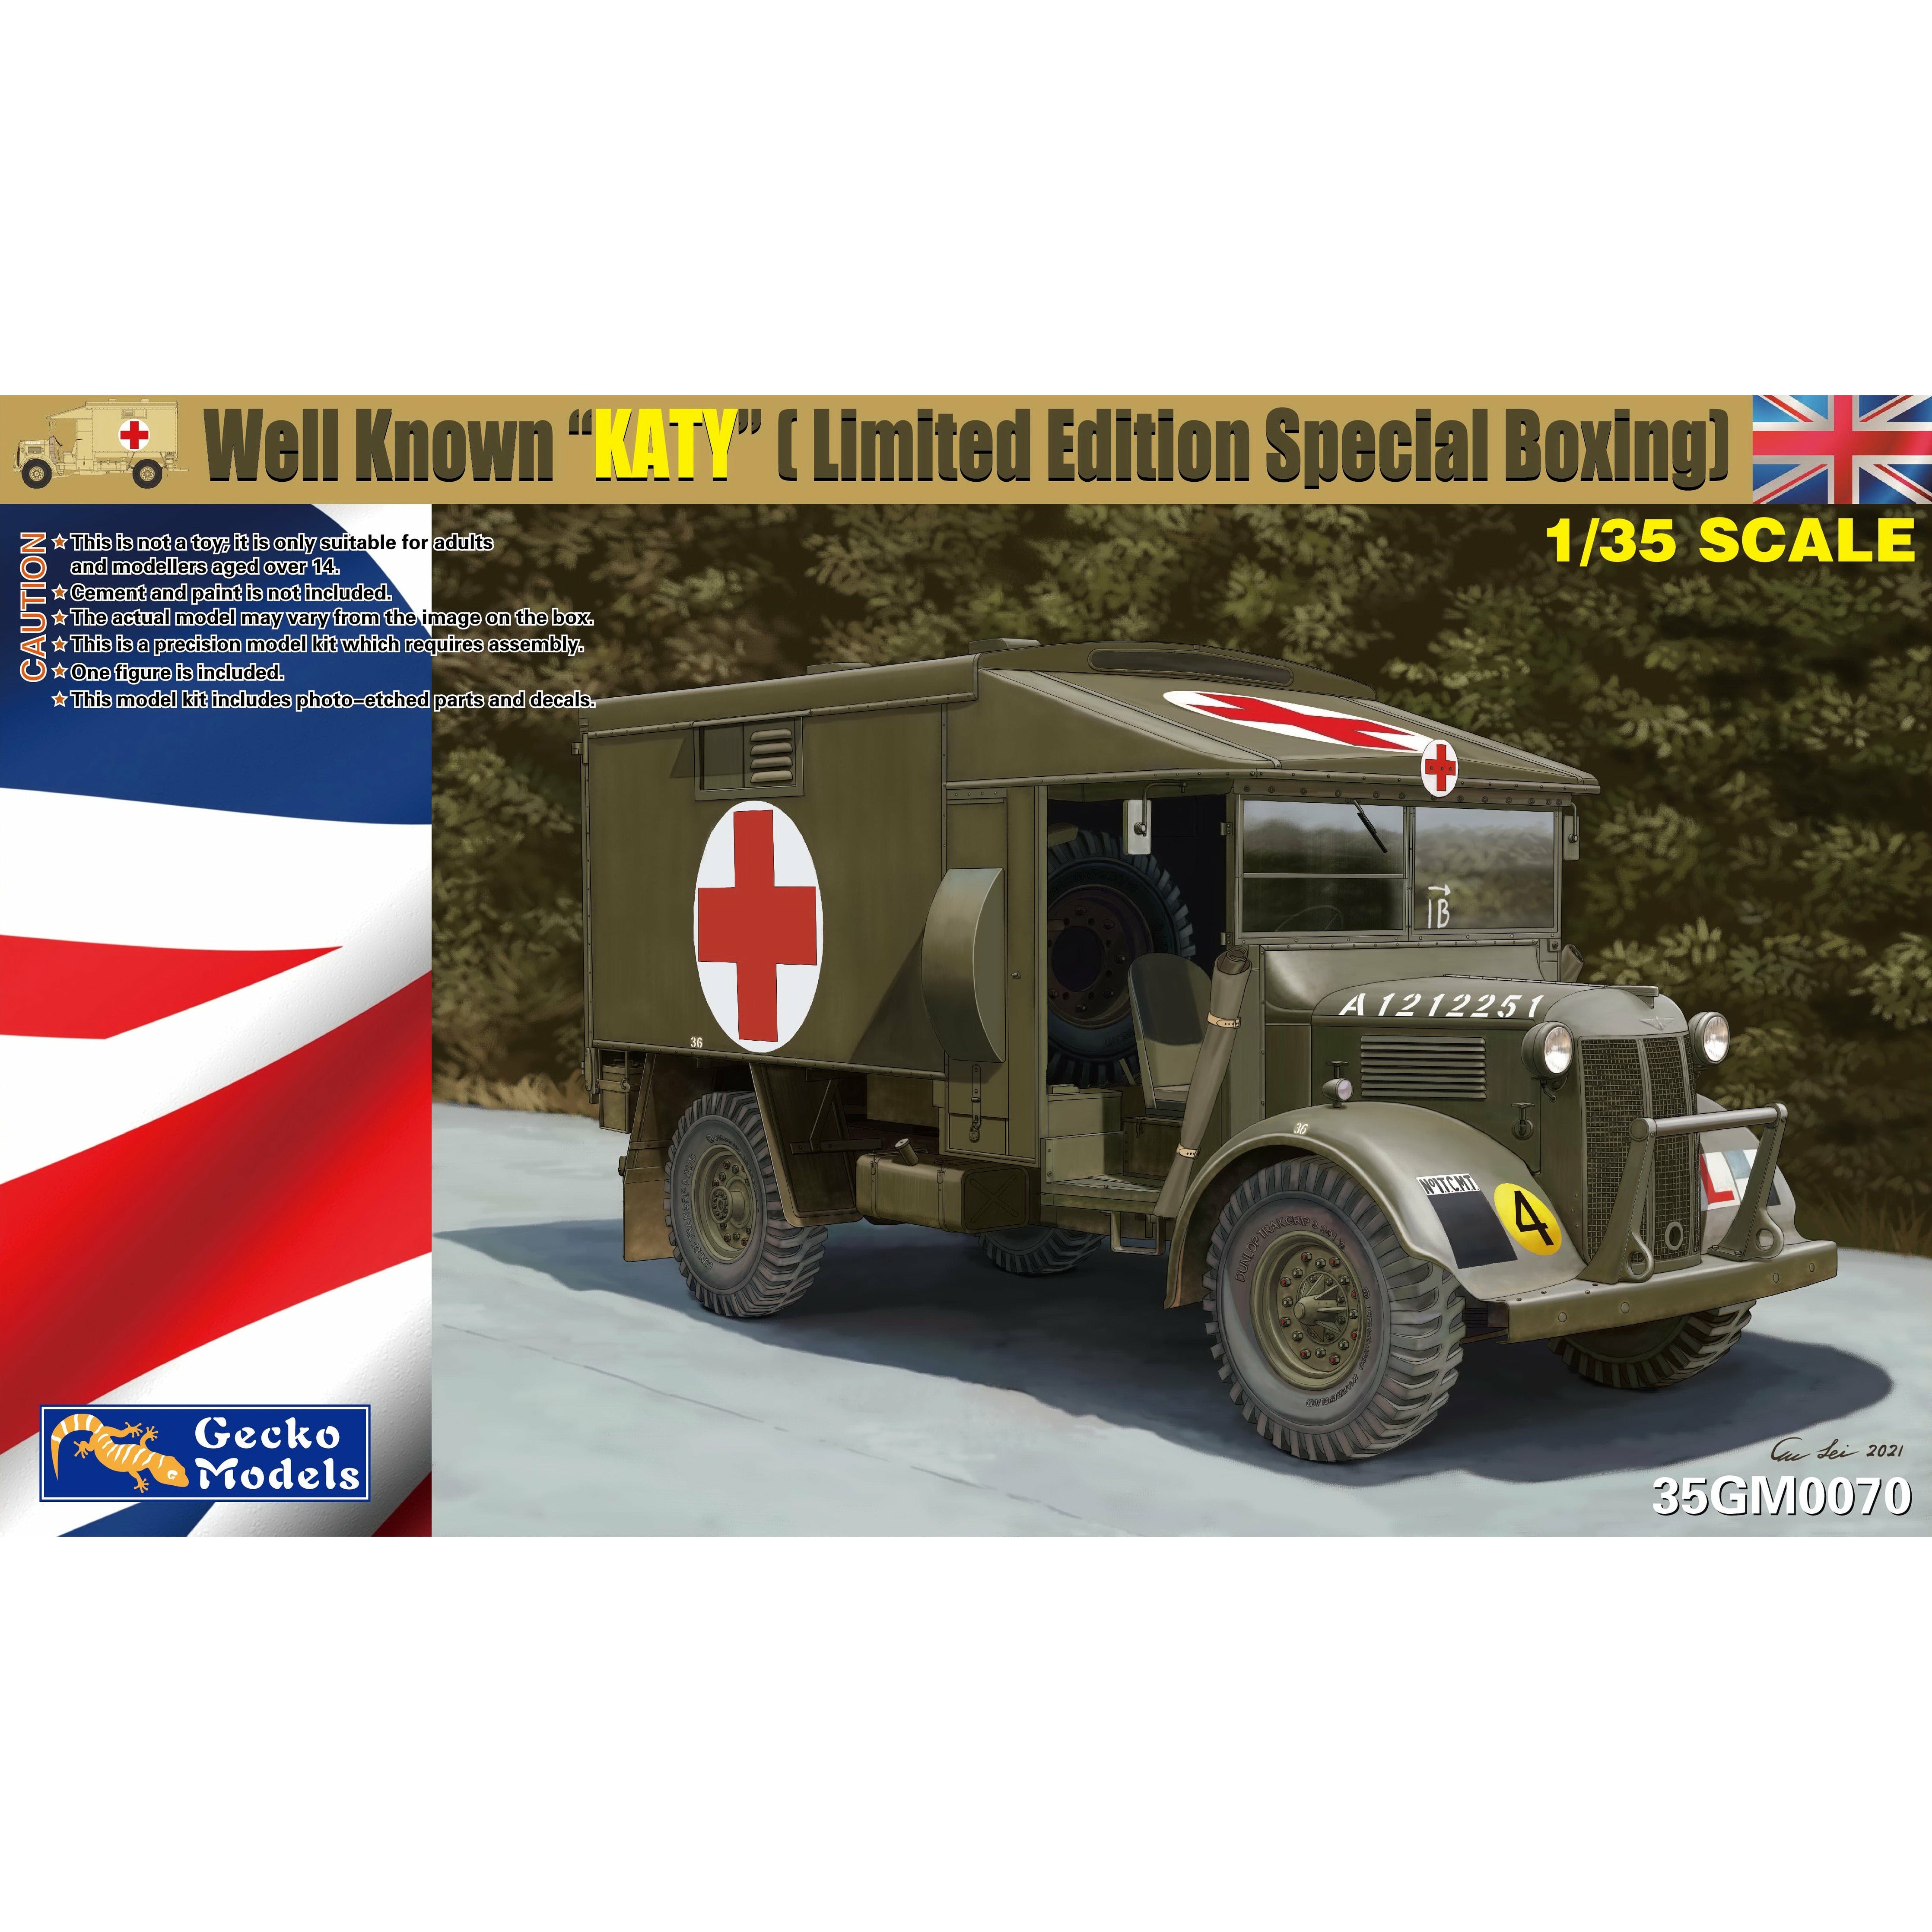 Famous KATY(Special Edition) 1/35 #35GM0070 by Gecko Models